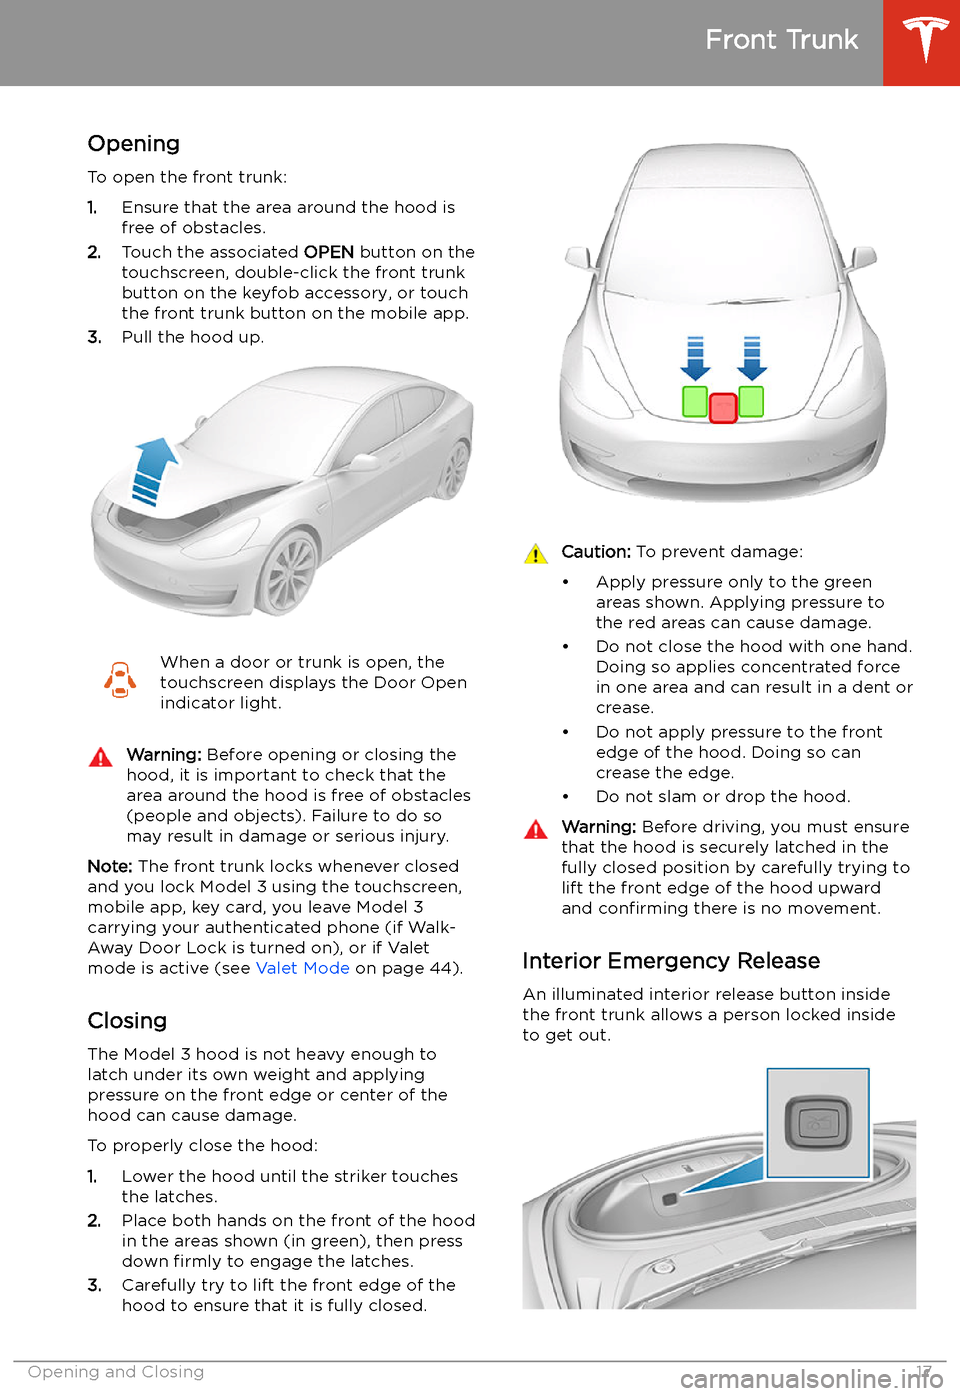 TESLA MODEL 3 2019  Owners Manual (Europe) Front Trunk
Opening
To open the front trunk:
1. Ensure that the area around the hood is
free of obstacles.
2. Touch the associated  OPEN button on the
touchscreen, double-click the front trunk
button 